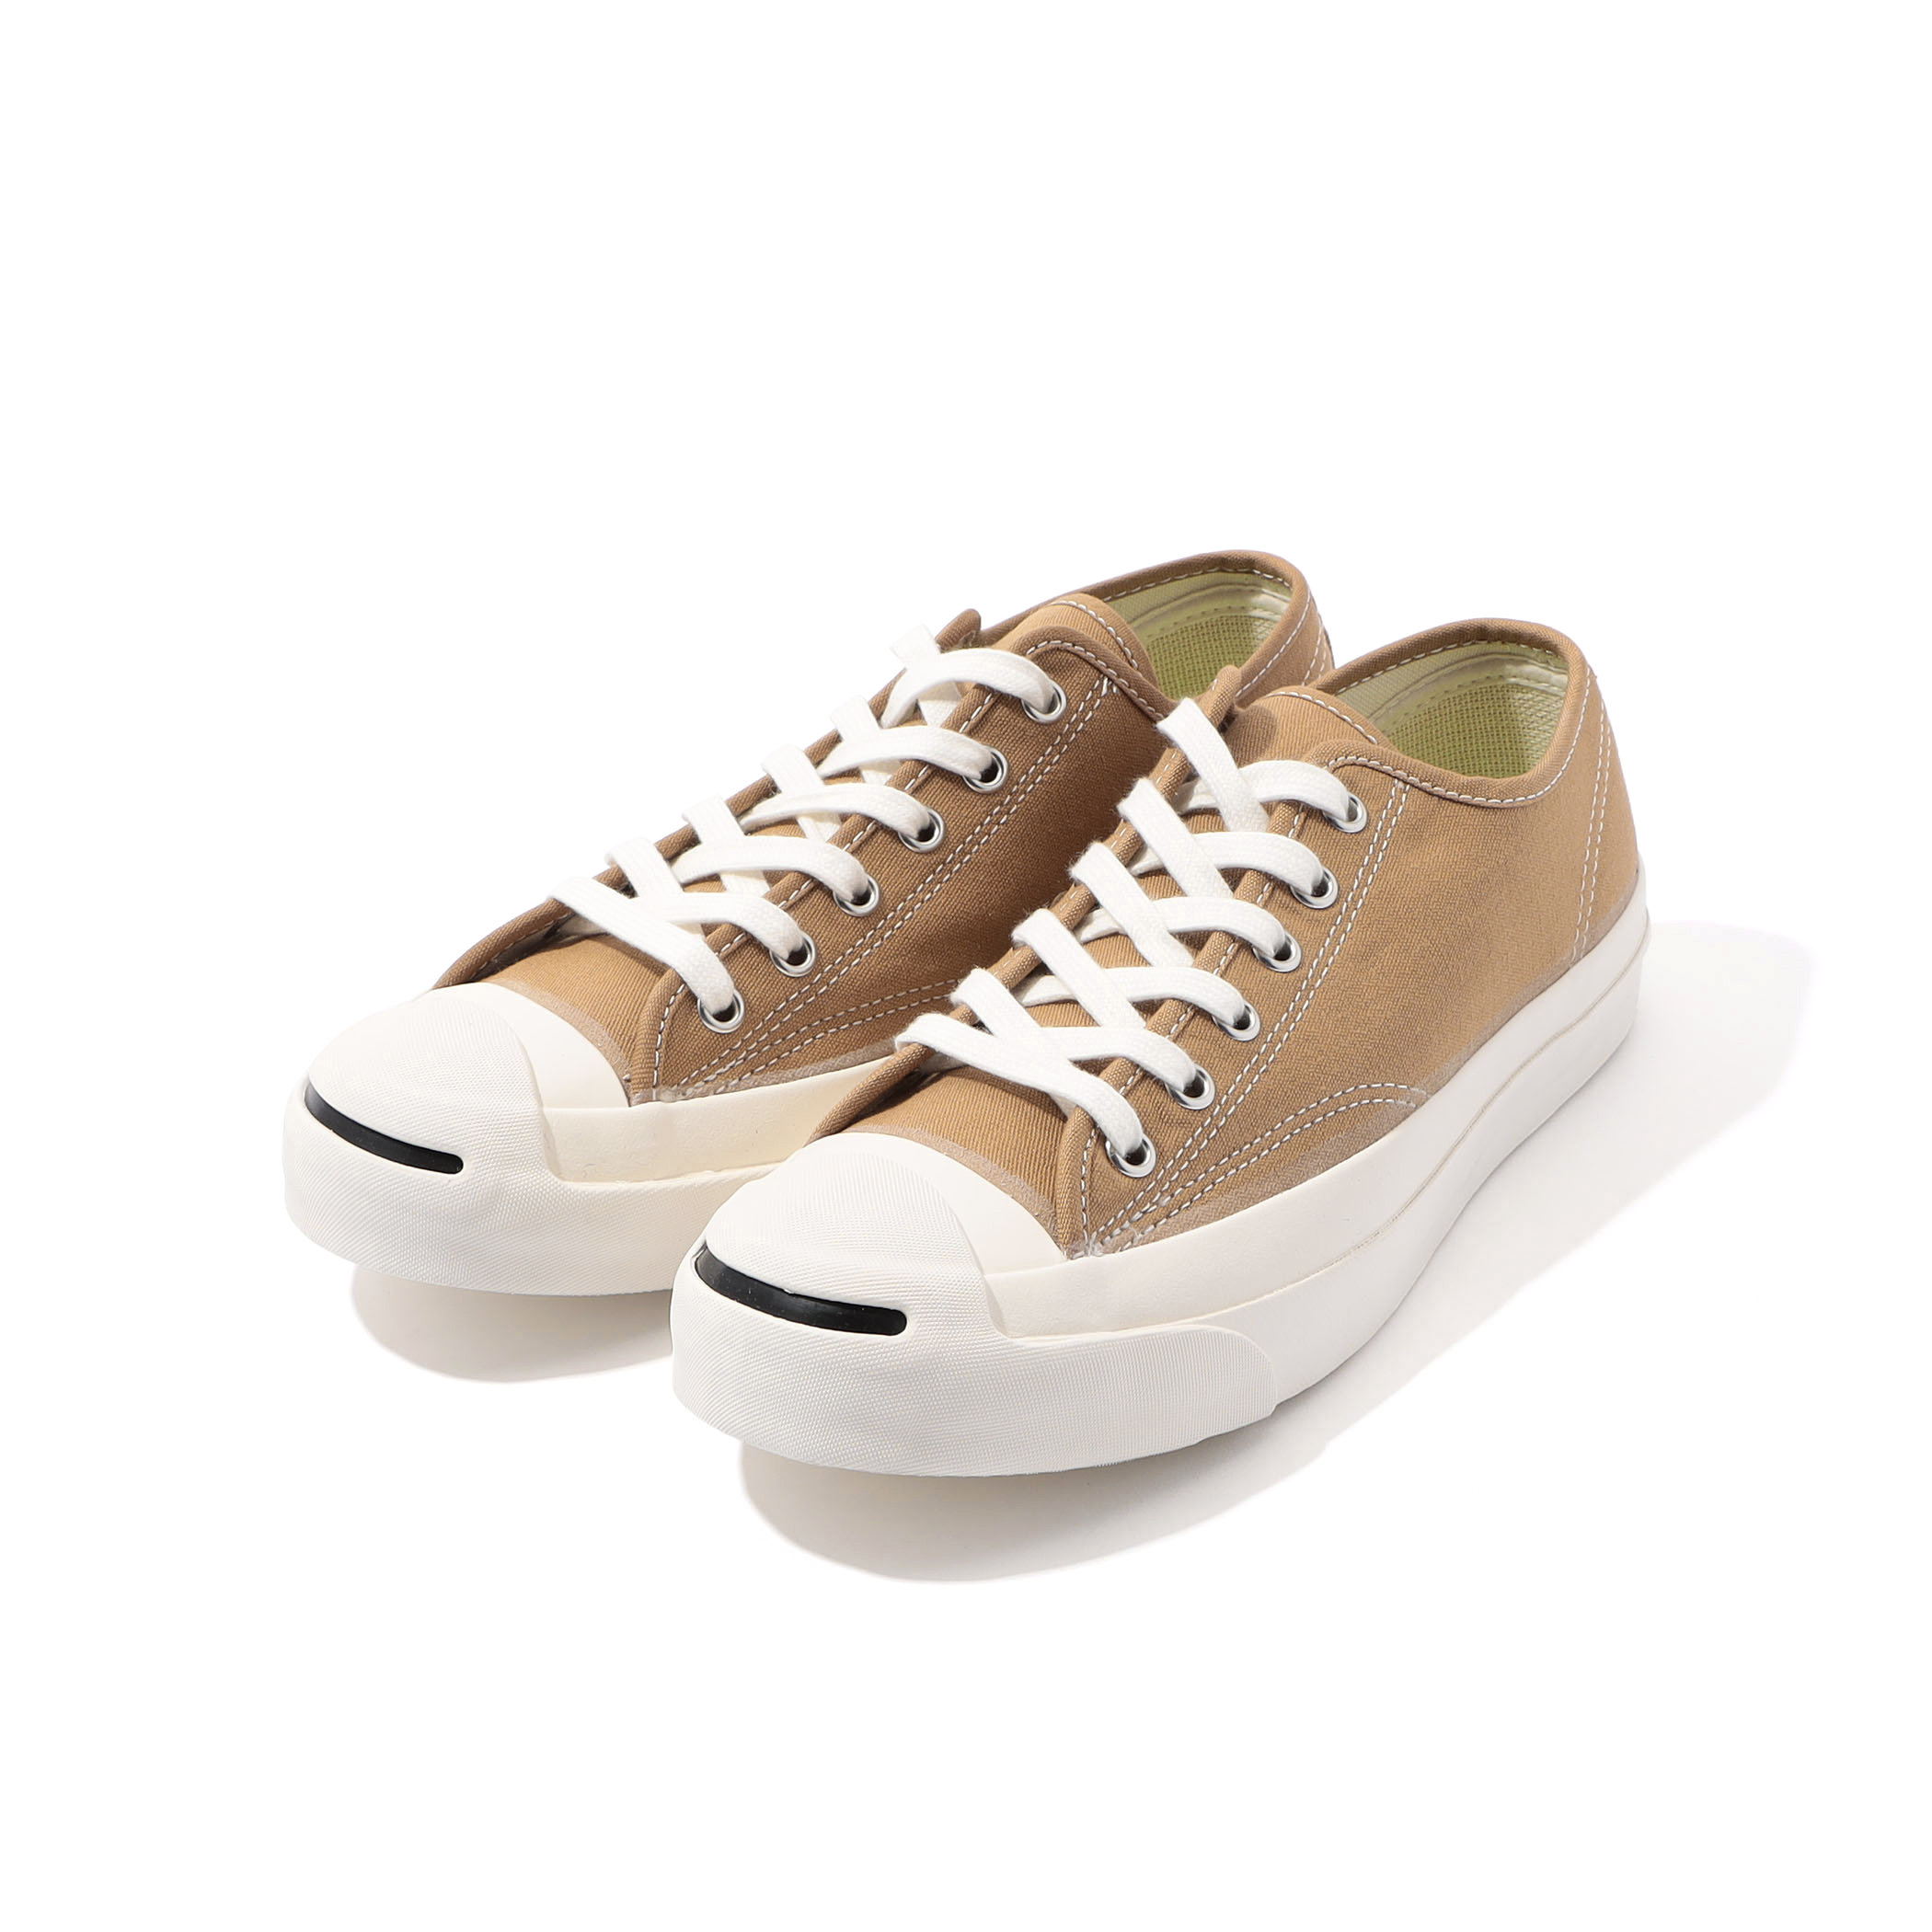 converse addict jack purcell canvas